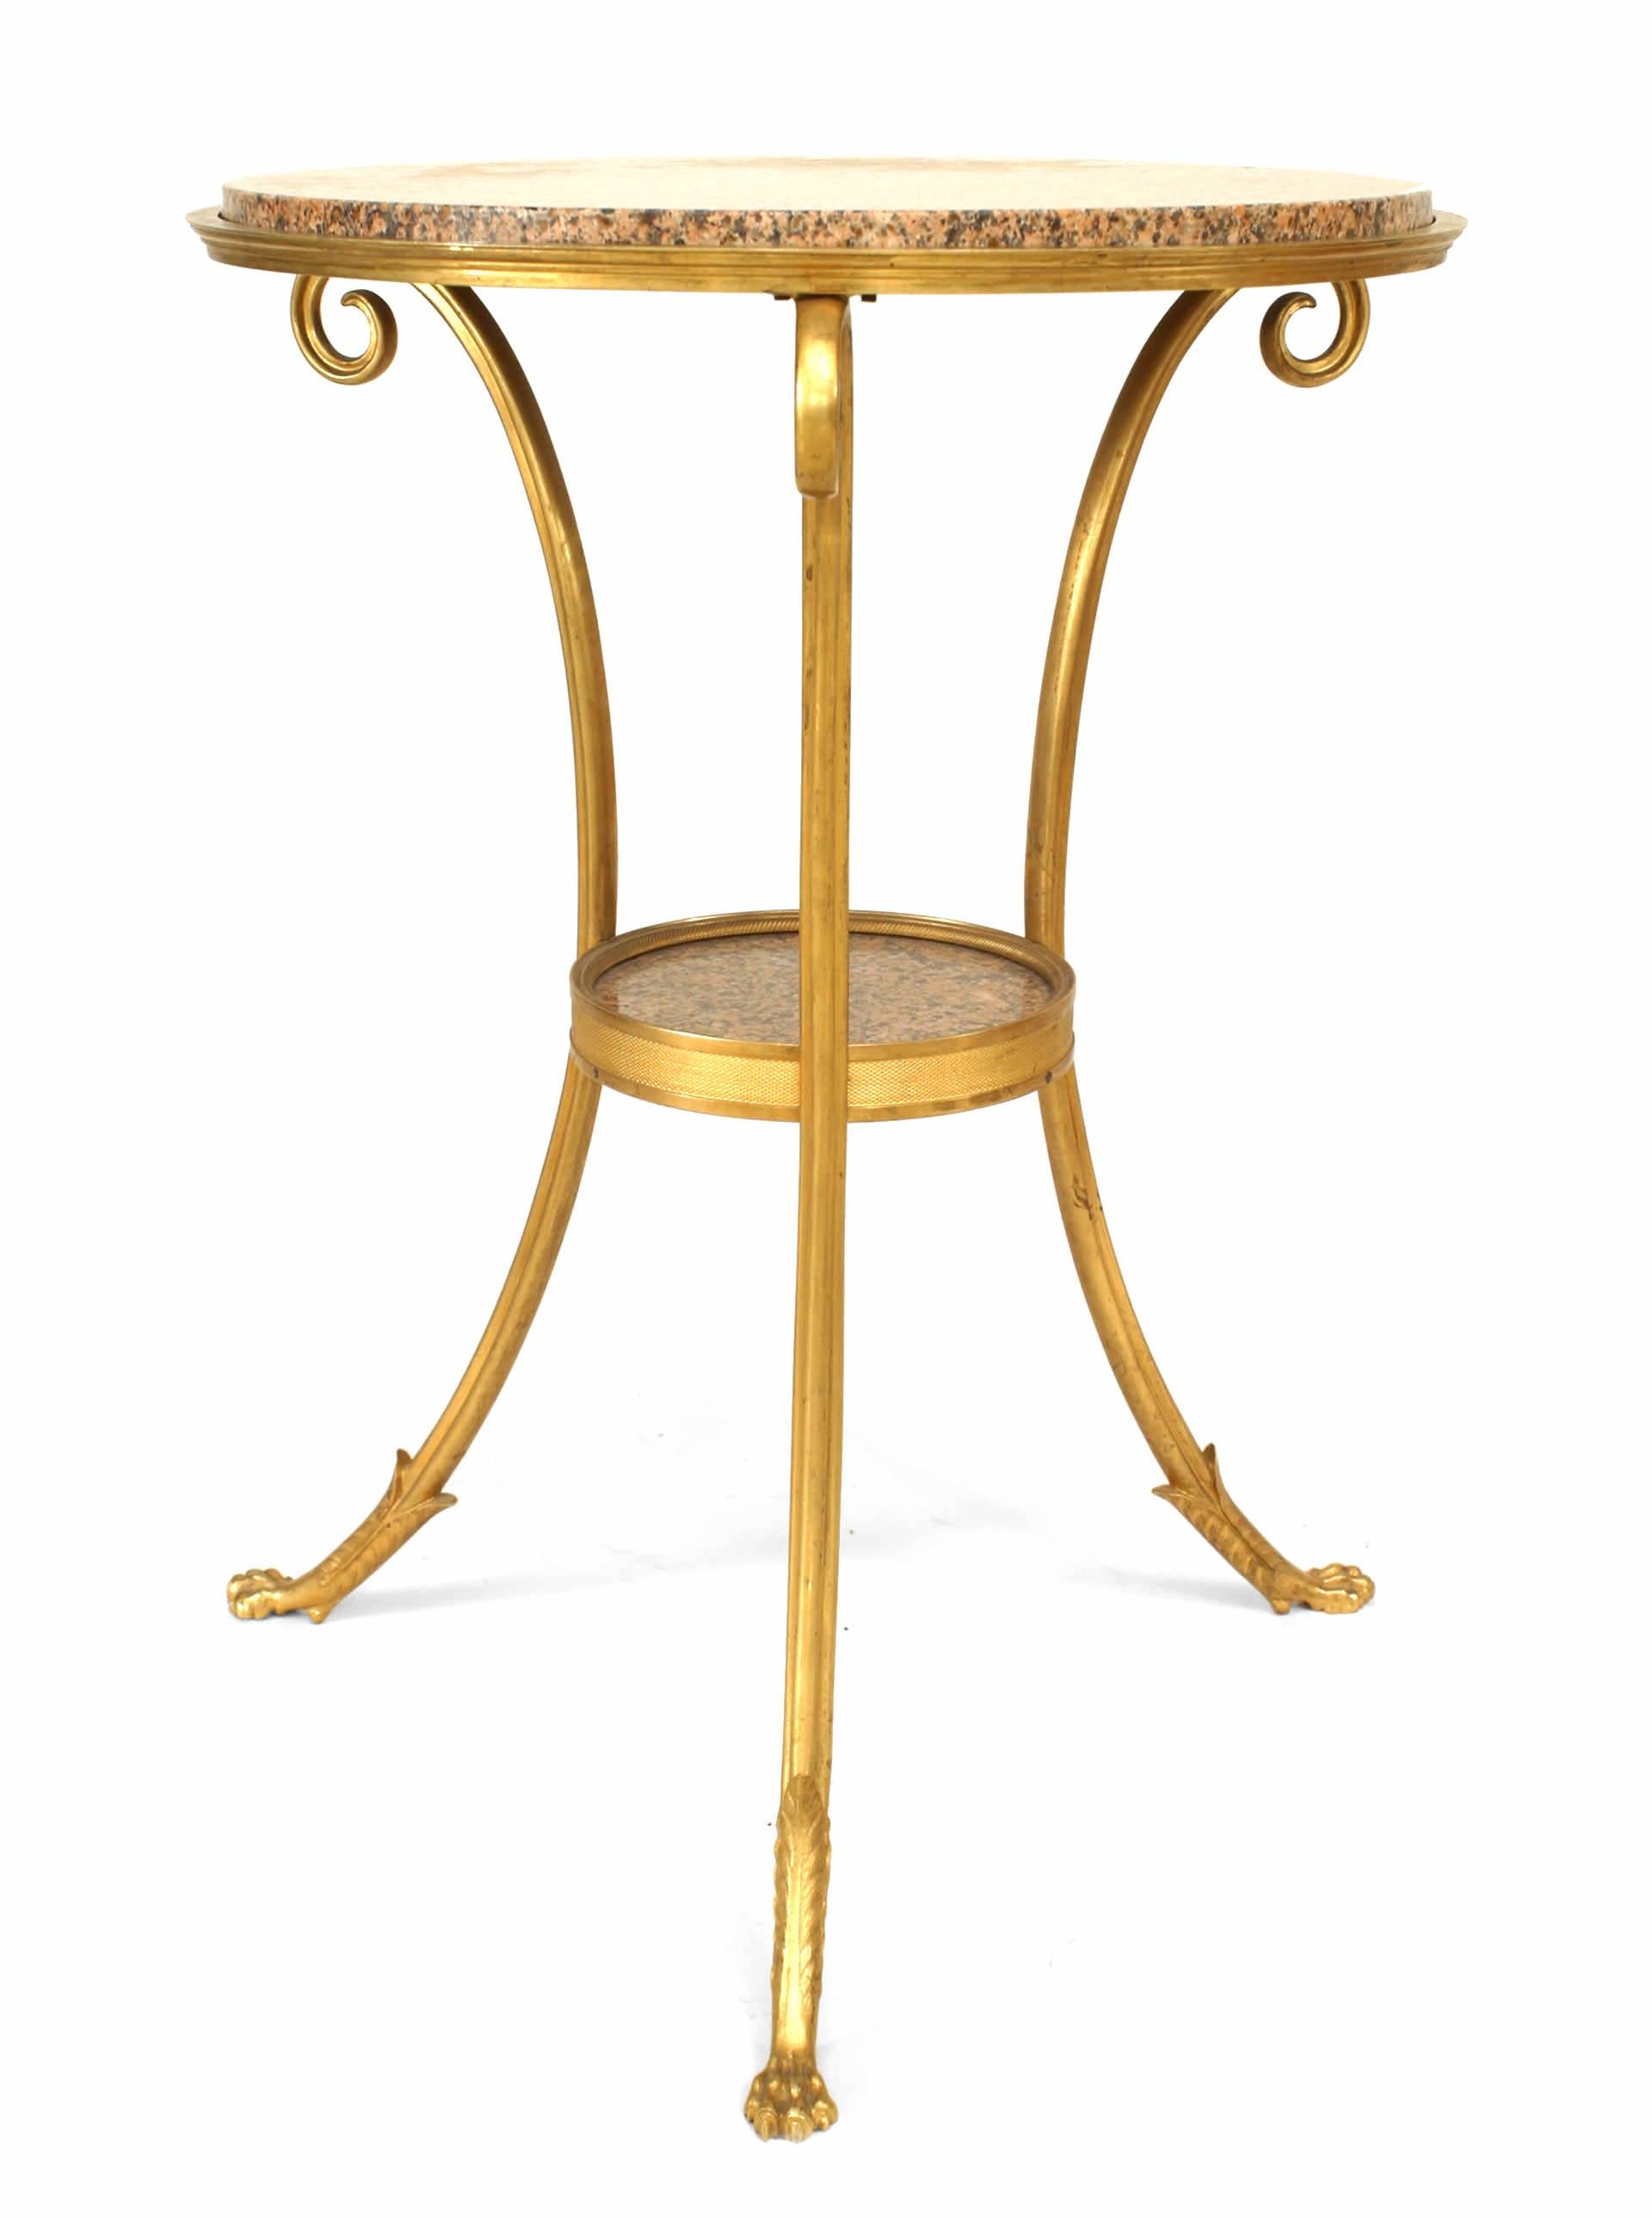 French Directoire-style (20th century) gilt bronze end table with 3 scroll legs and inset round pink and black speckled marble top and shelf.